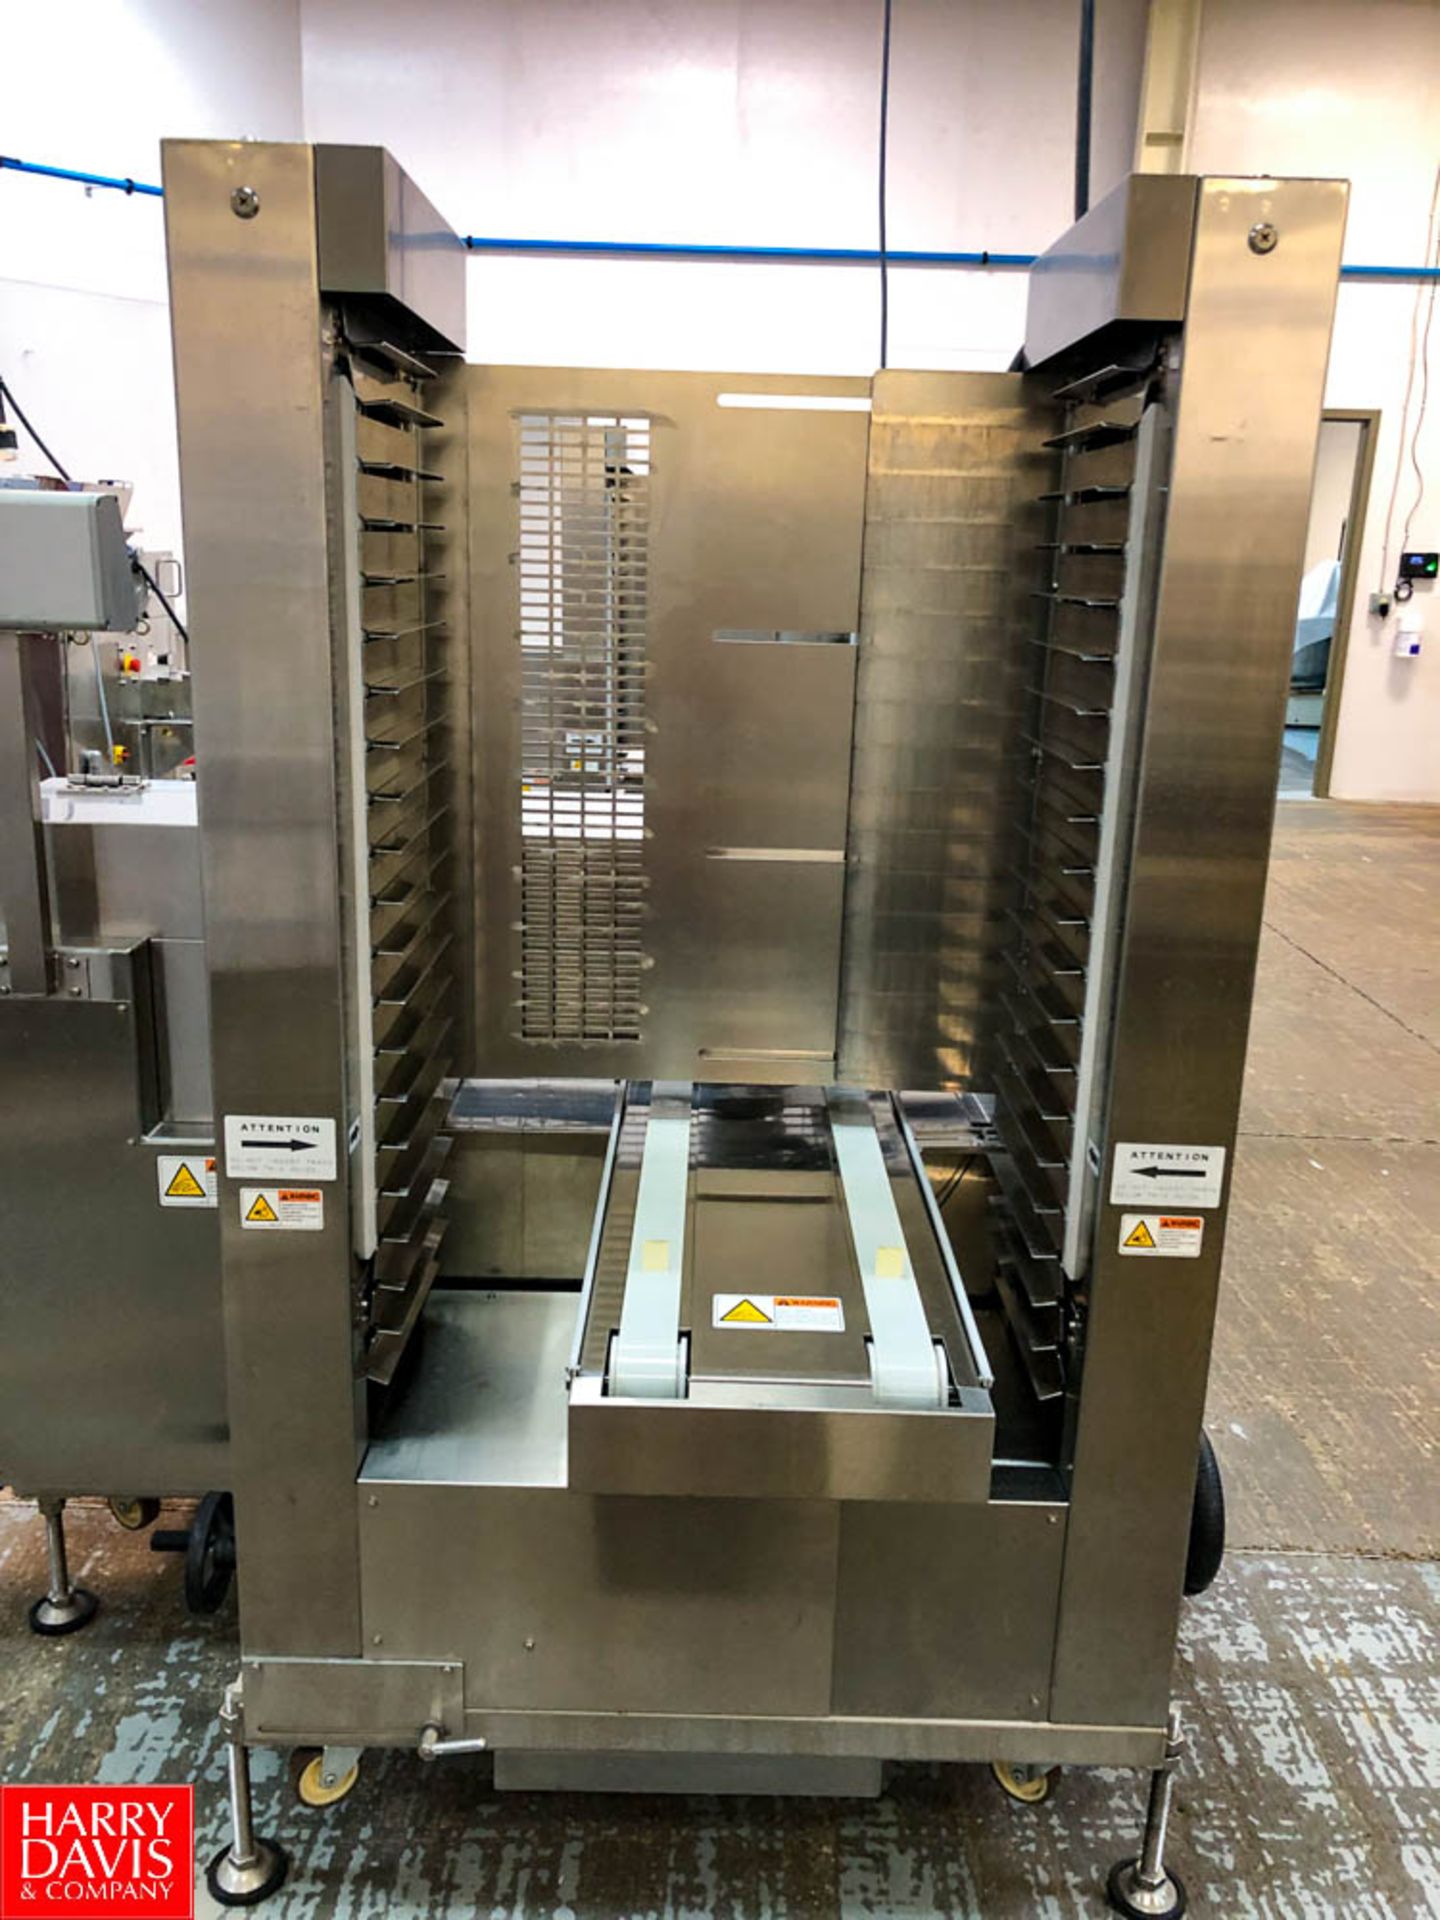 2019 Rheon Set Panner KP302; Tray Size: 660 mm, Up to 60 pcs/min, S/N: 00232 With Belting Rigging - Image 5 of 5